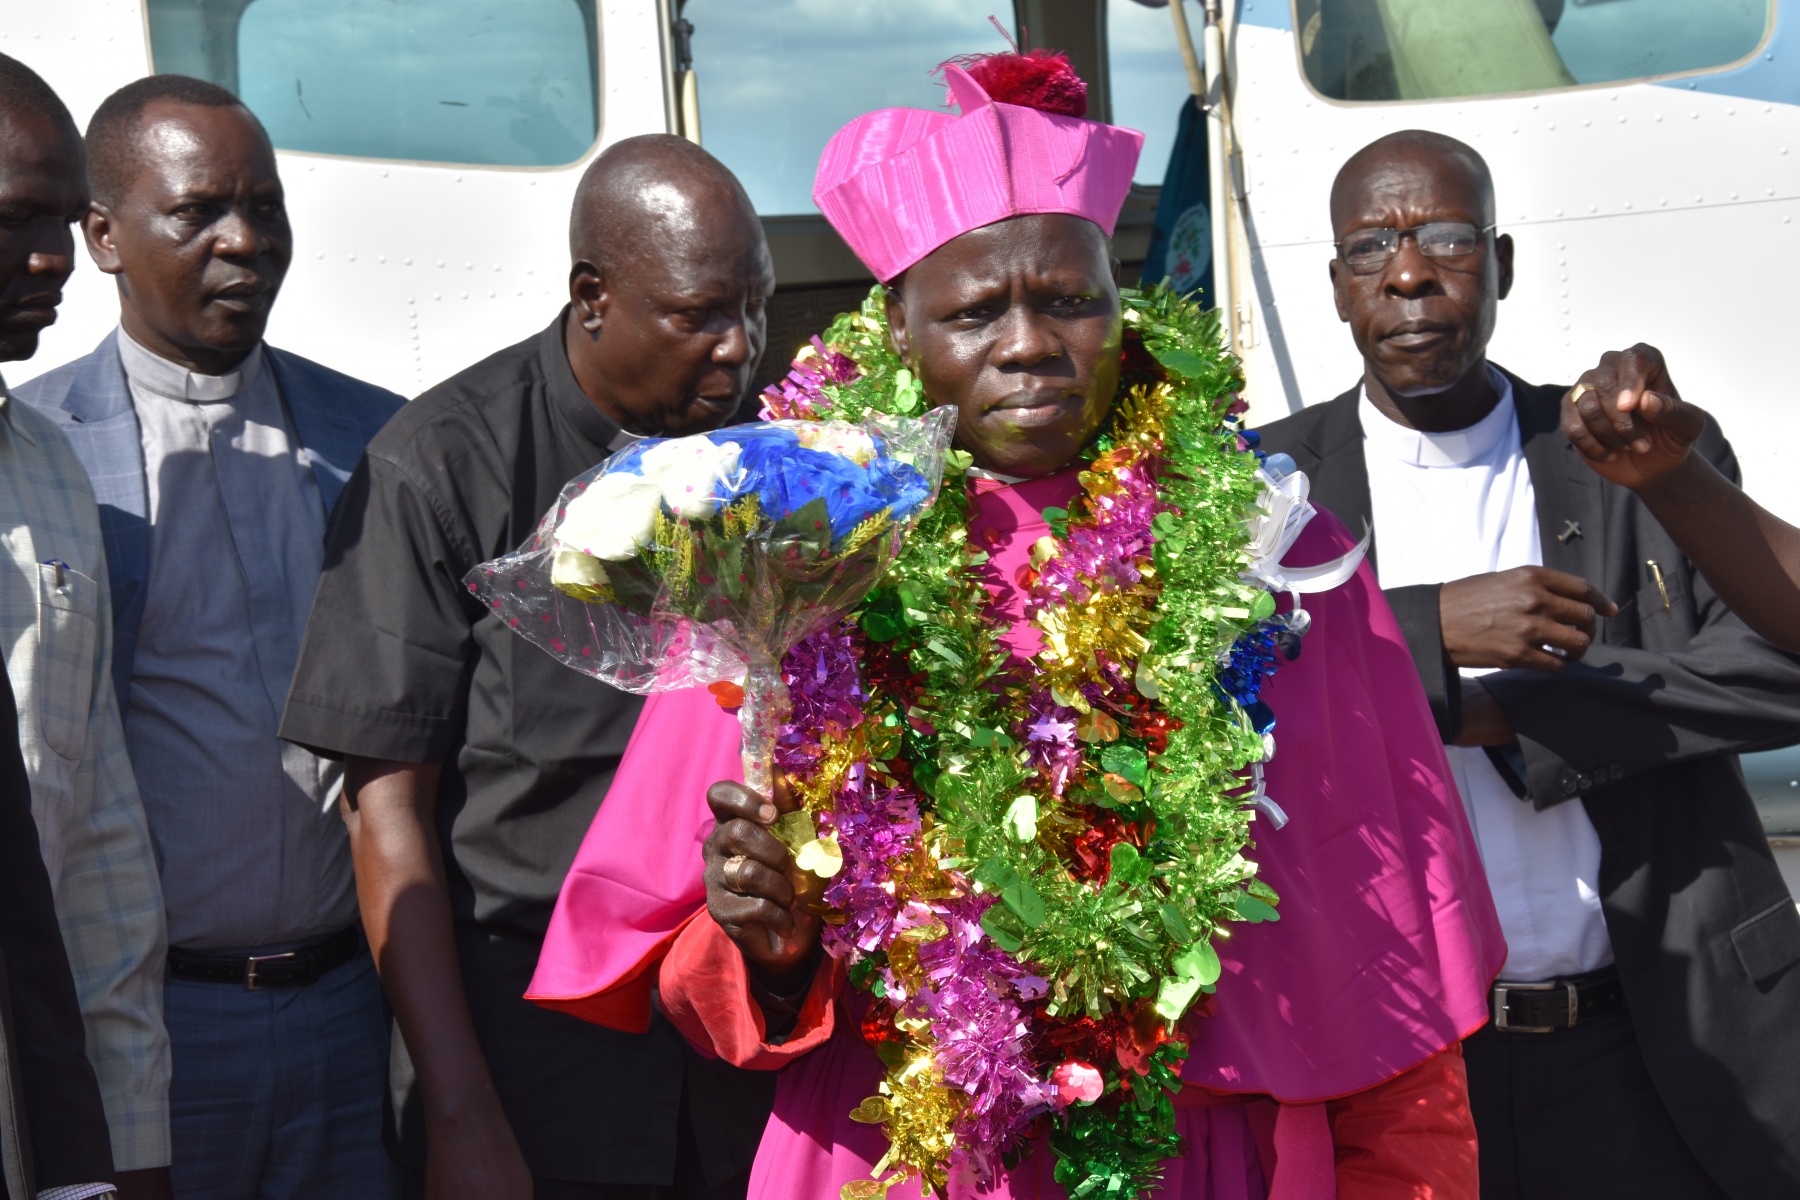 His-Grace-Stephen-Ameyu-Mulla-being-welcomed-At-The-Juba-International-Airport-by-the-members-of-the-Clergy